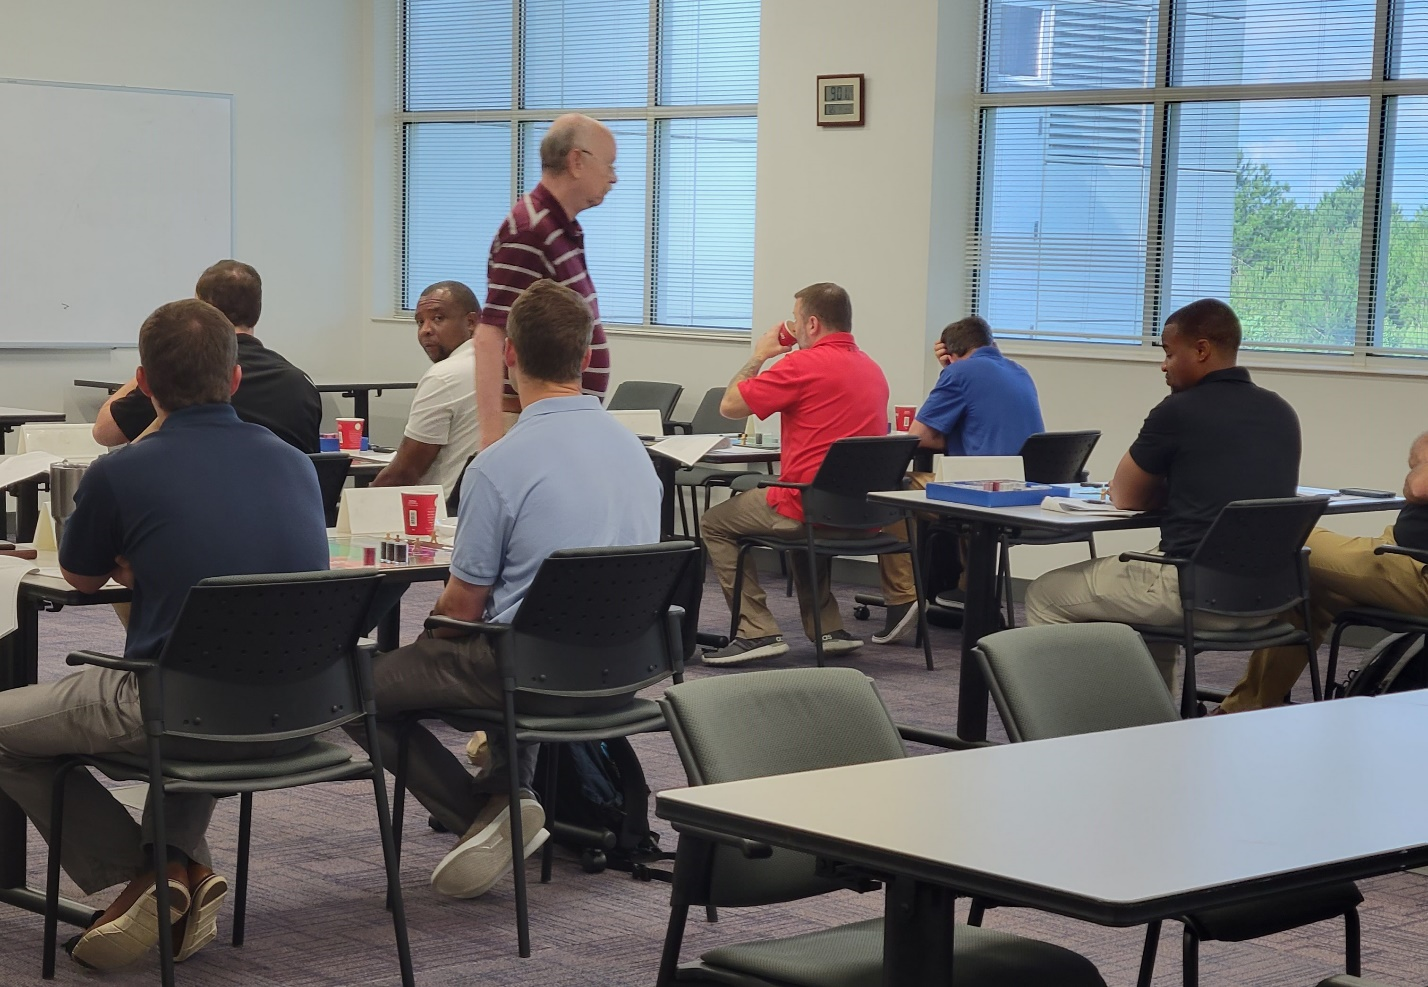 Pictured: Steve Puryear, CAVS-E Instructor, and students participating in the Financial Fundamentals course